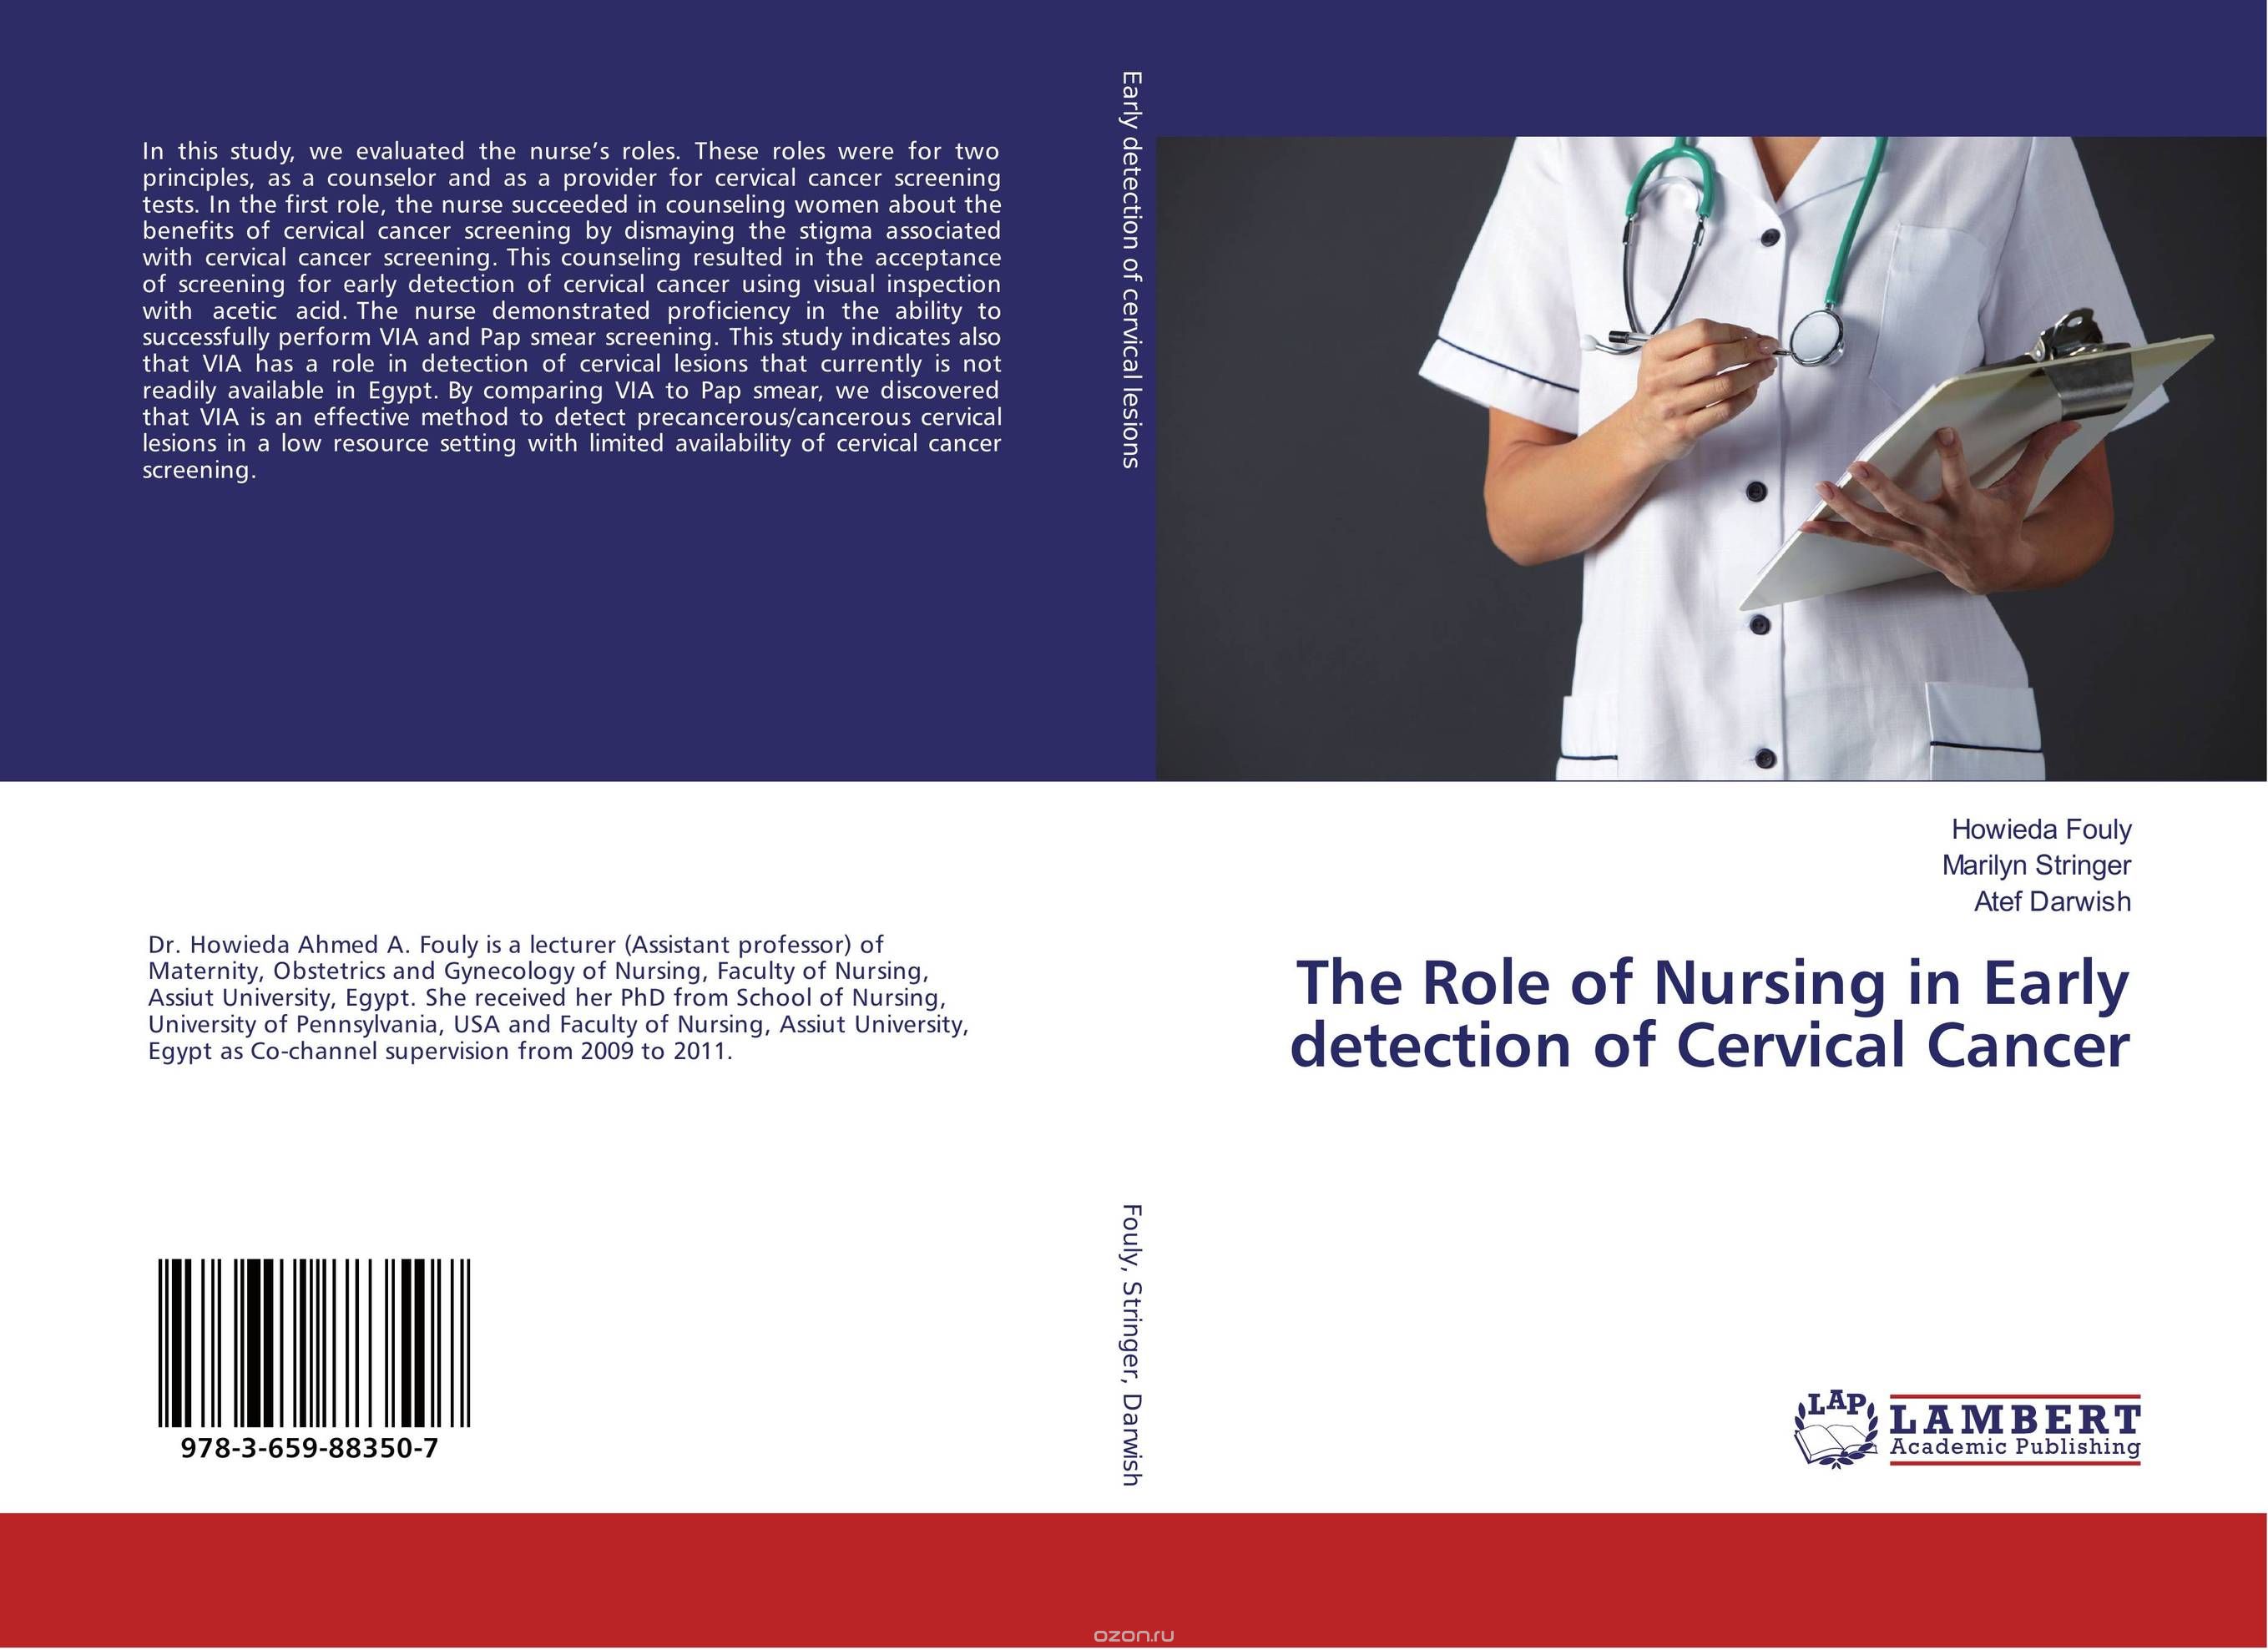 The Role of Nursing in Early detection of Cervical Cancer